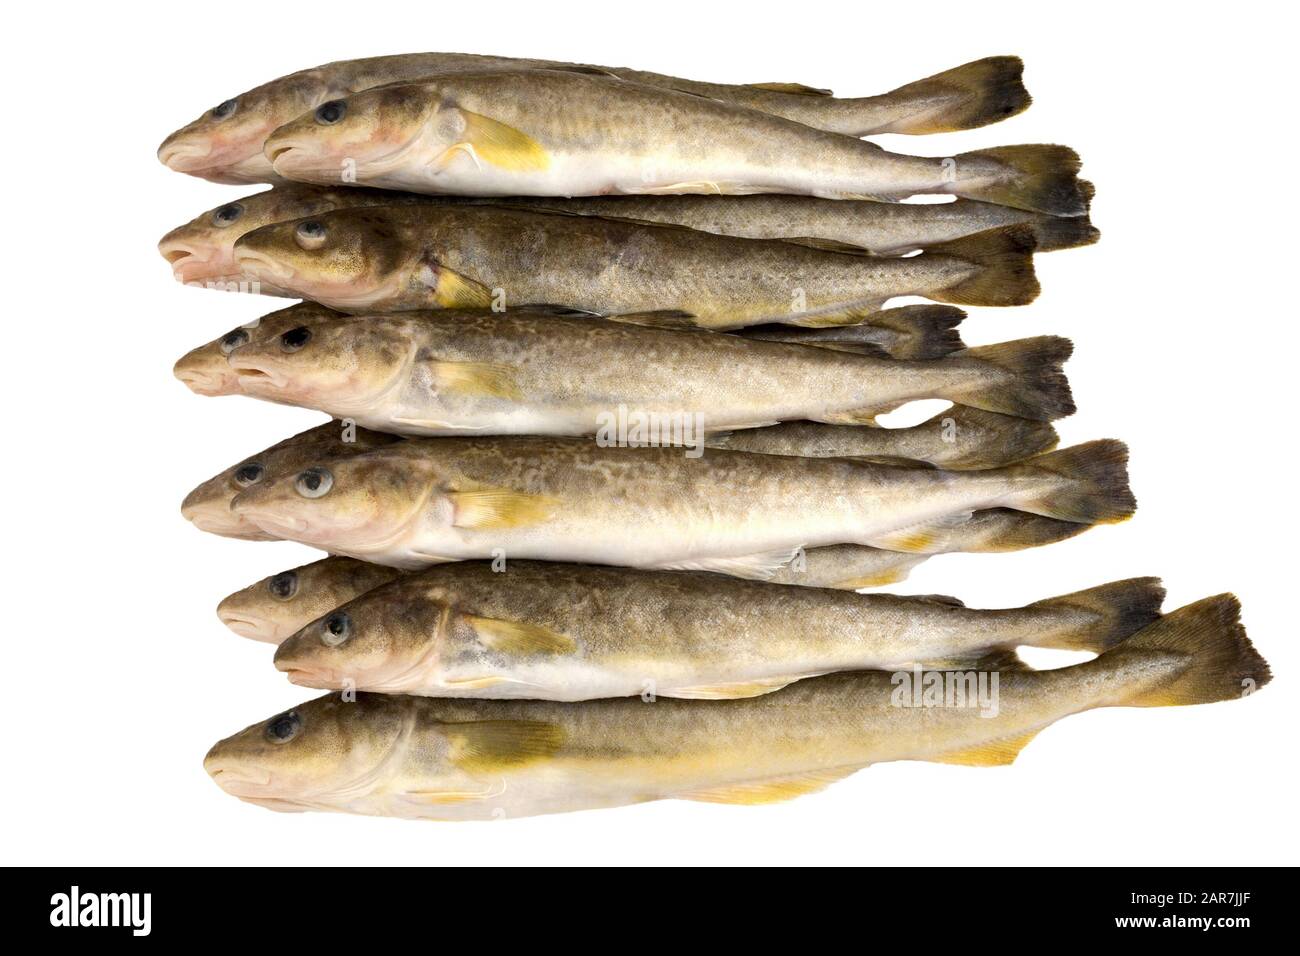 Fresh raw fish isolated on white background. Saltwater fish.  Navaga fish.  Saffron cod. Fish from the Japanes sea. Pacific Ocean. Stock Photo